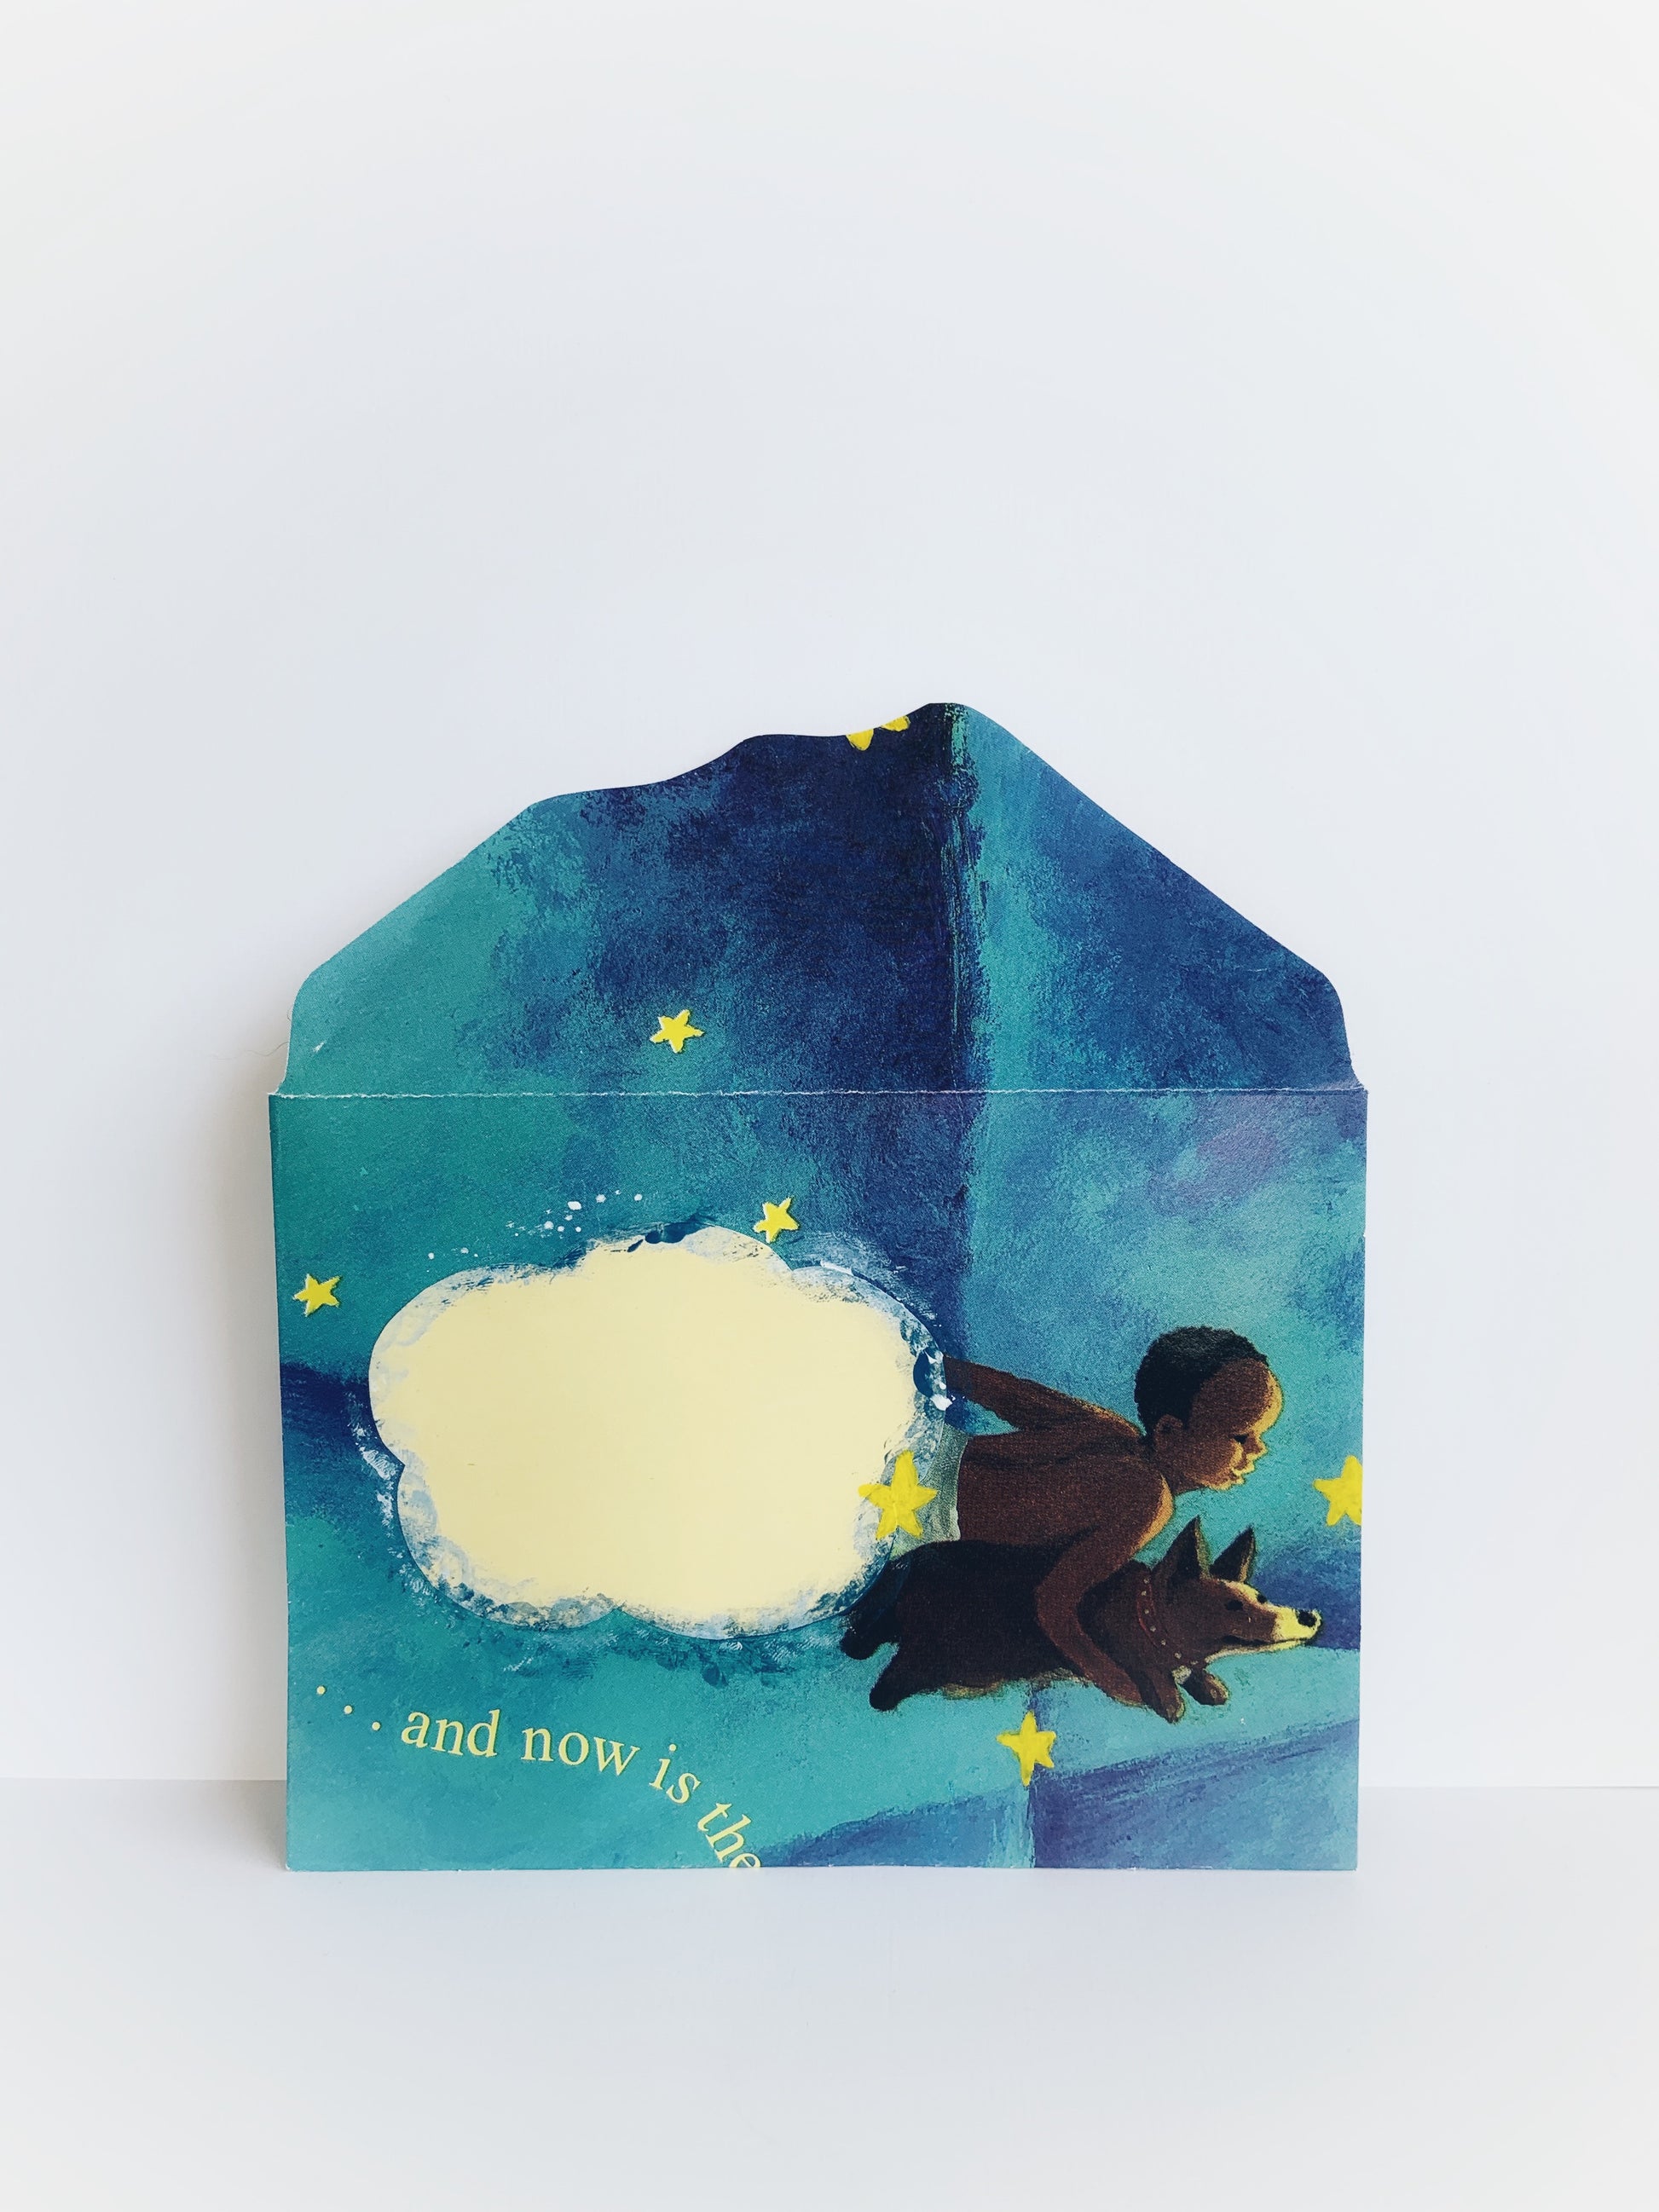 An envelope with a boy and his dog flying in a star-filled sky